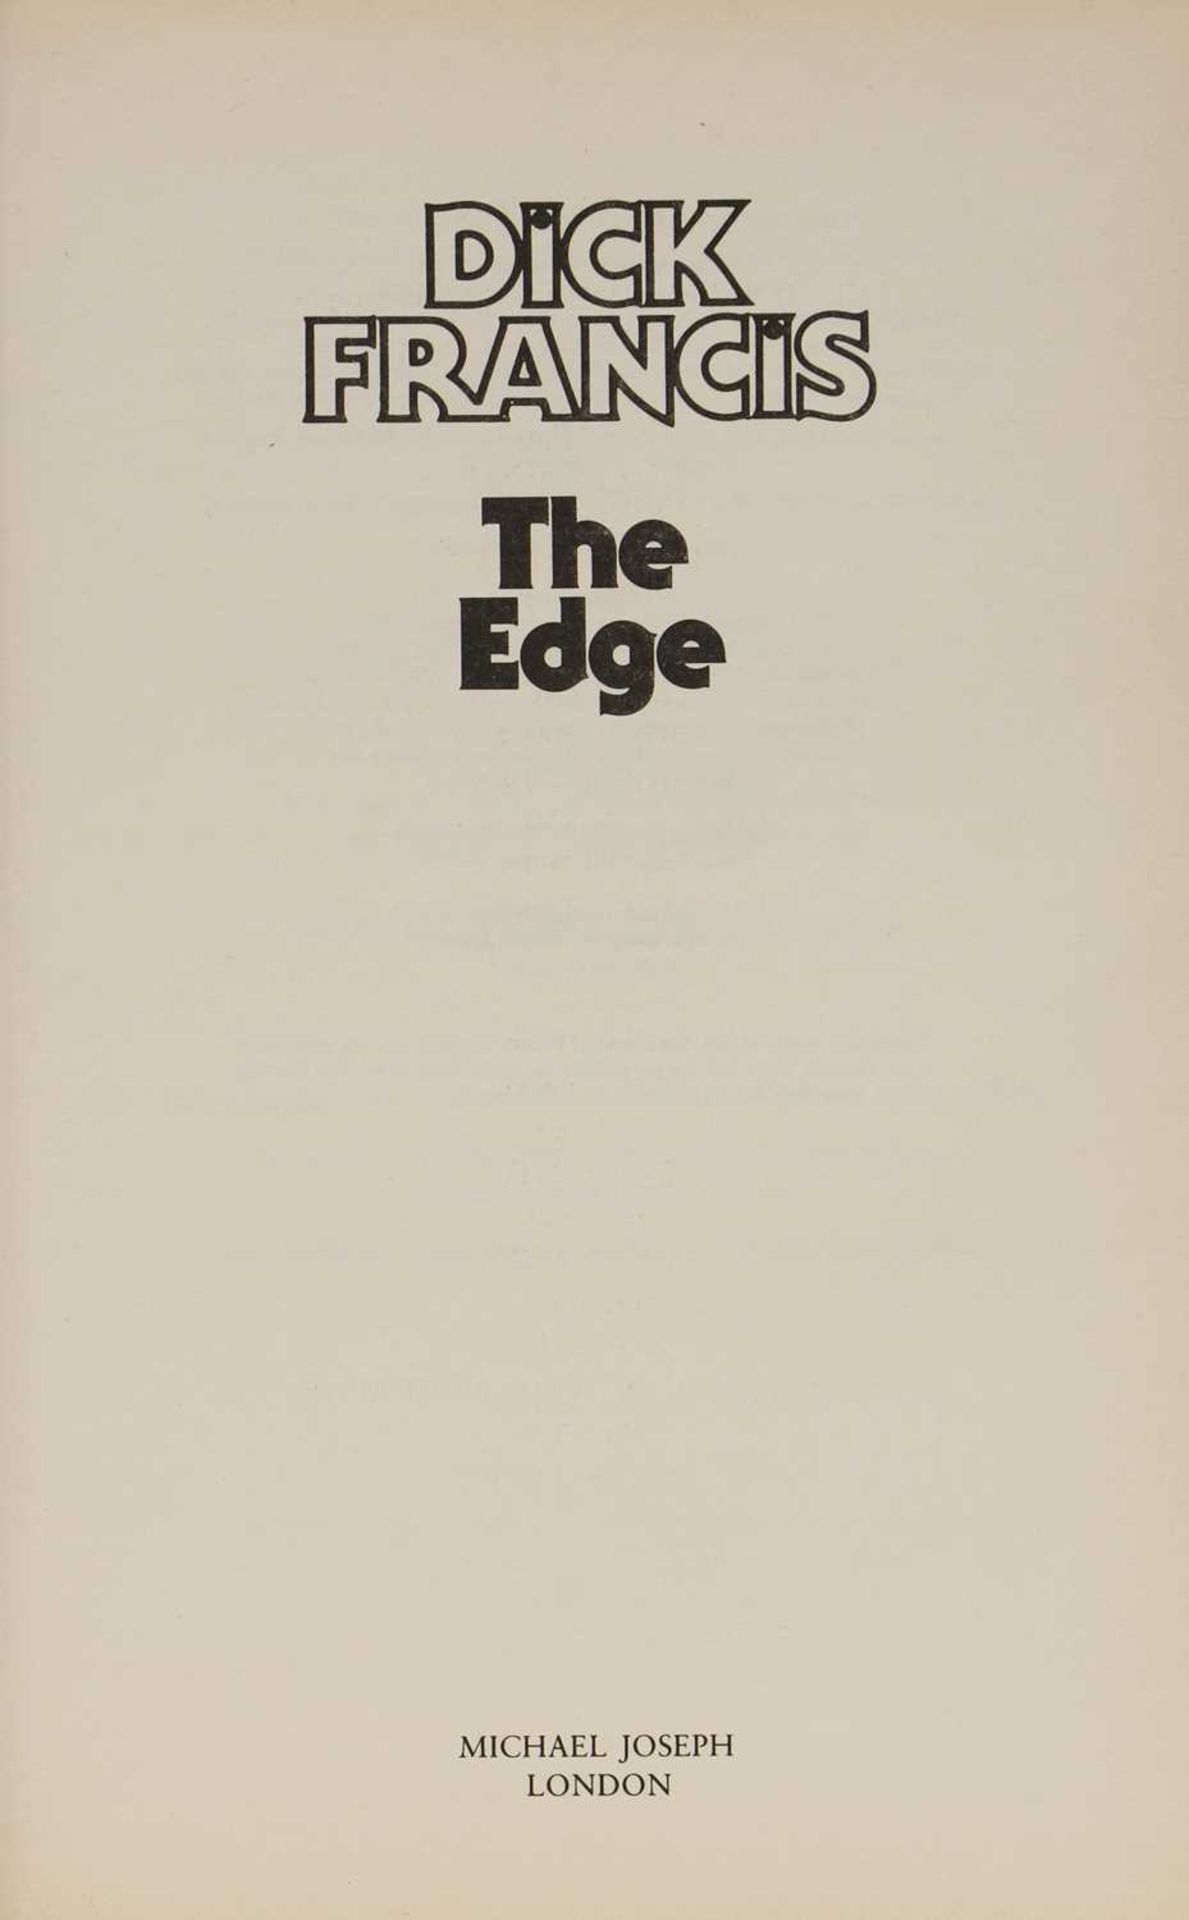 DICK FRANCIS - Image 2 of 4